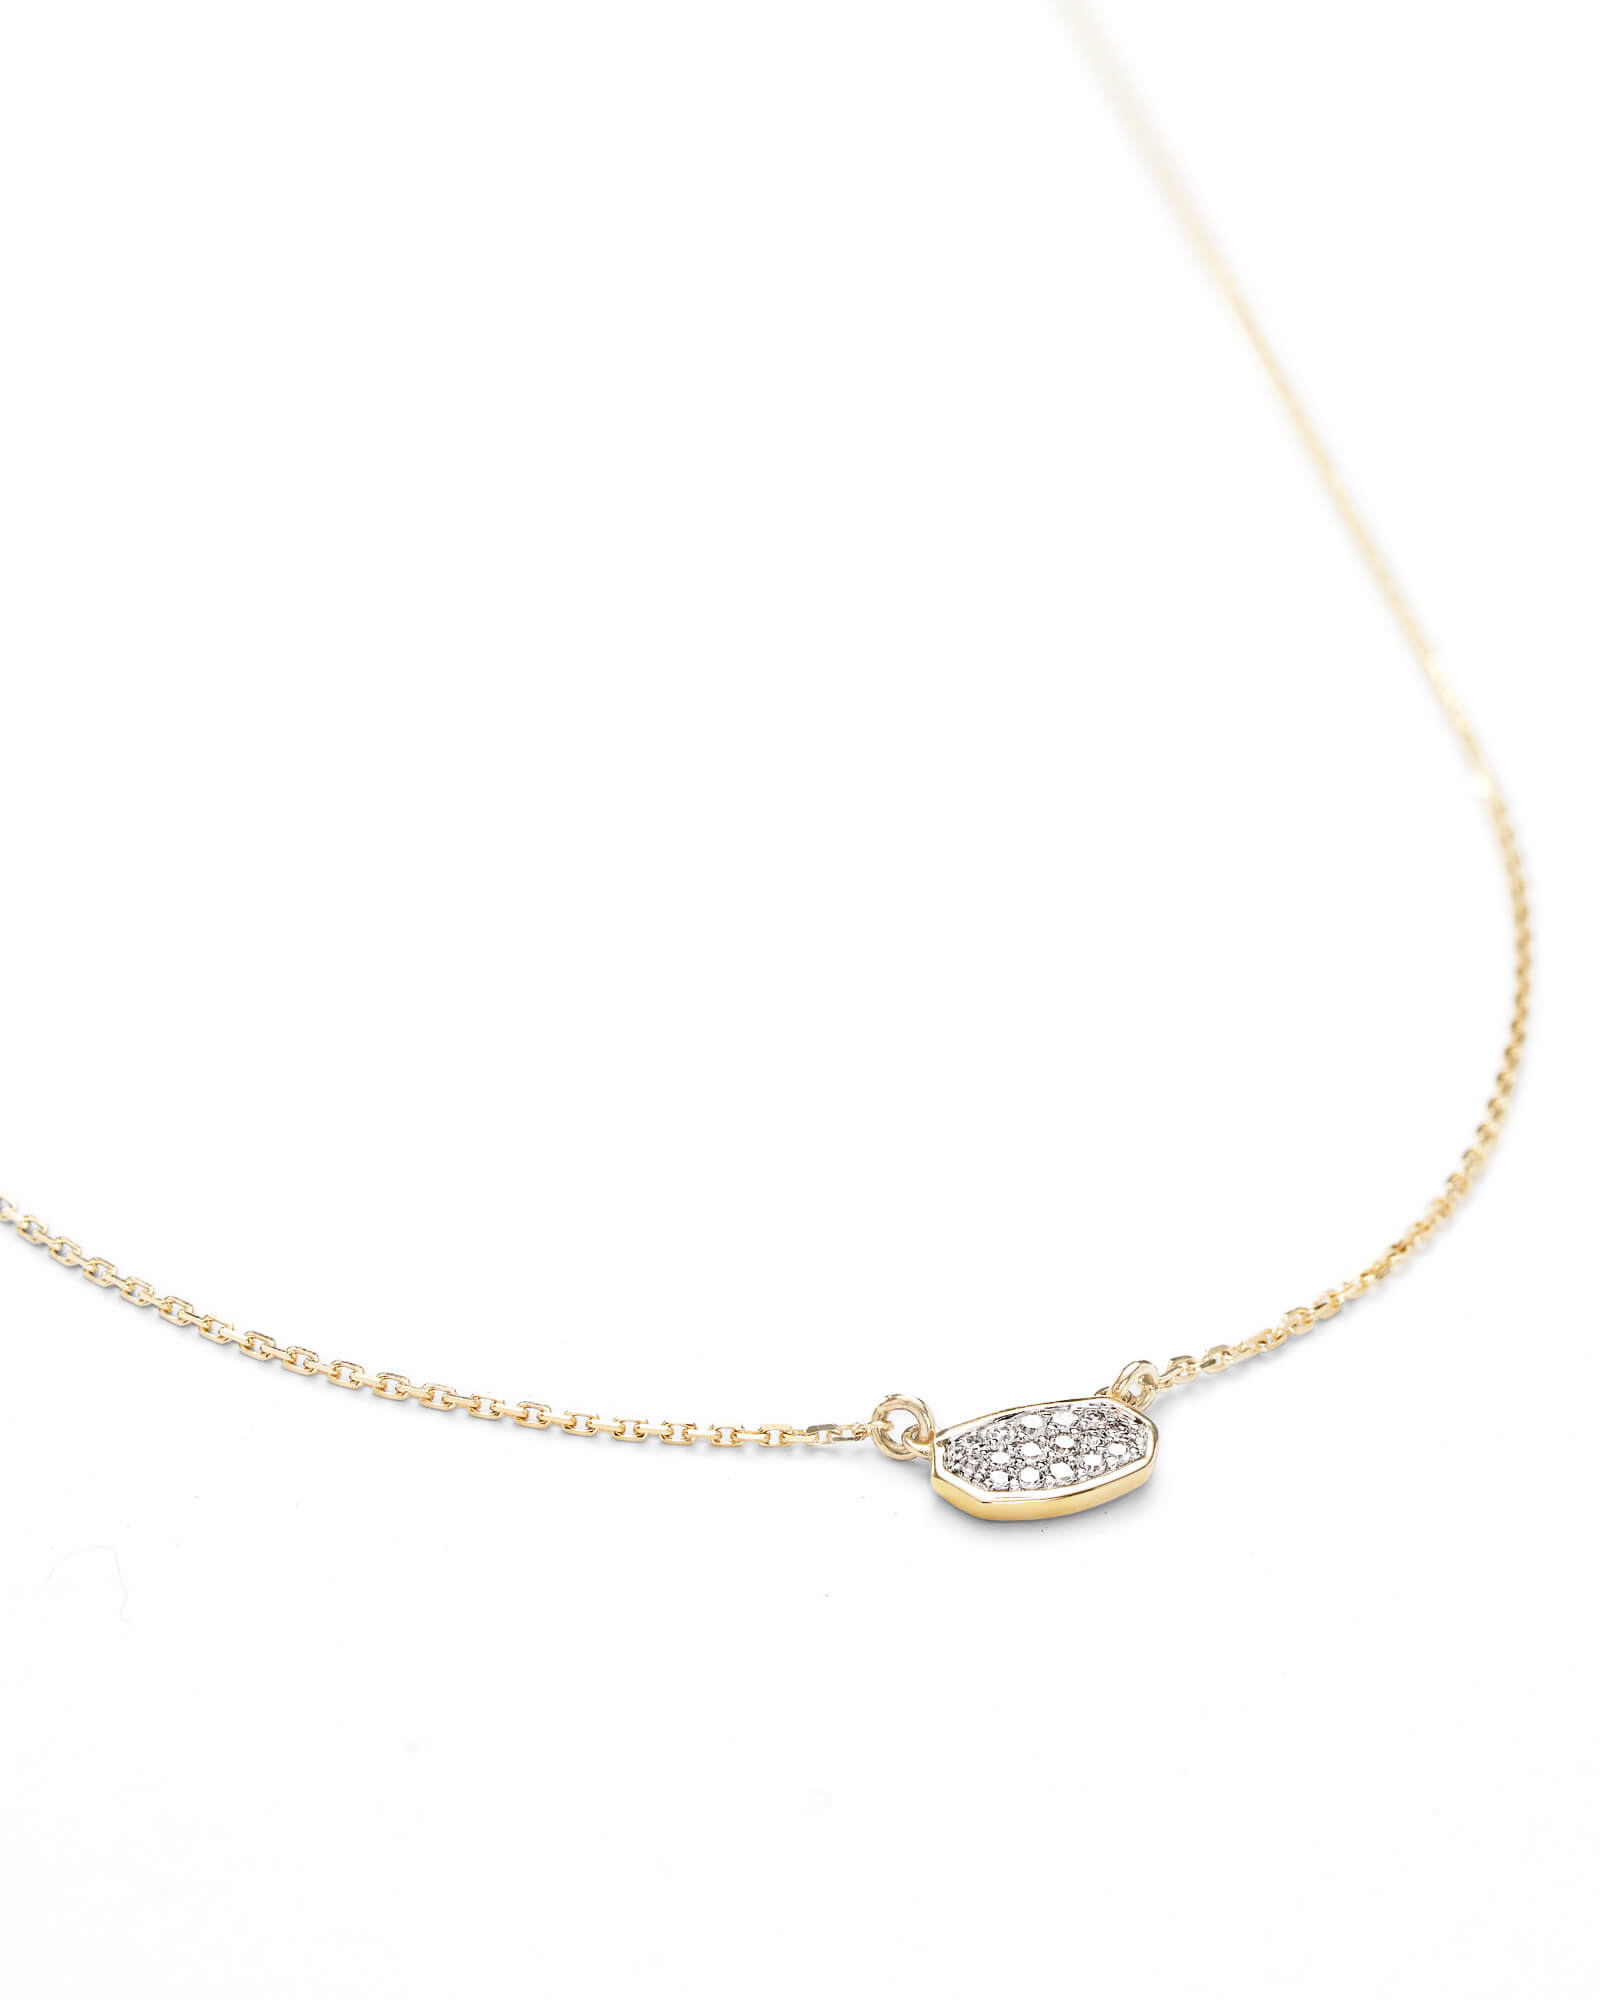 Marisa Pendant Necklace in White Diamond and 14k Yellow Gold